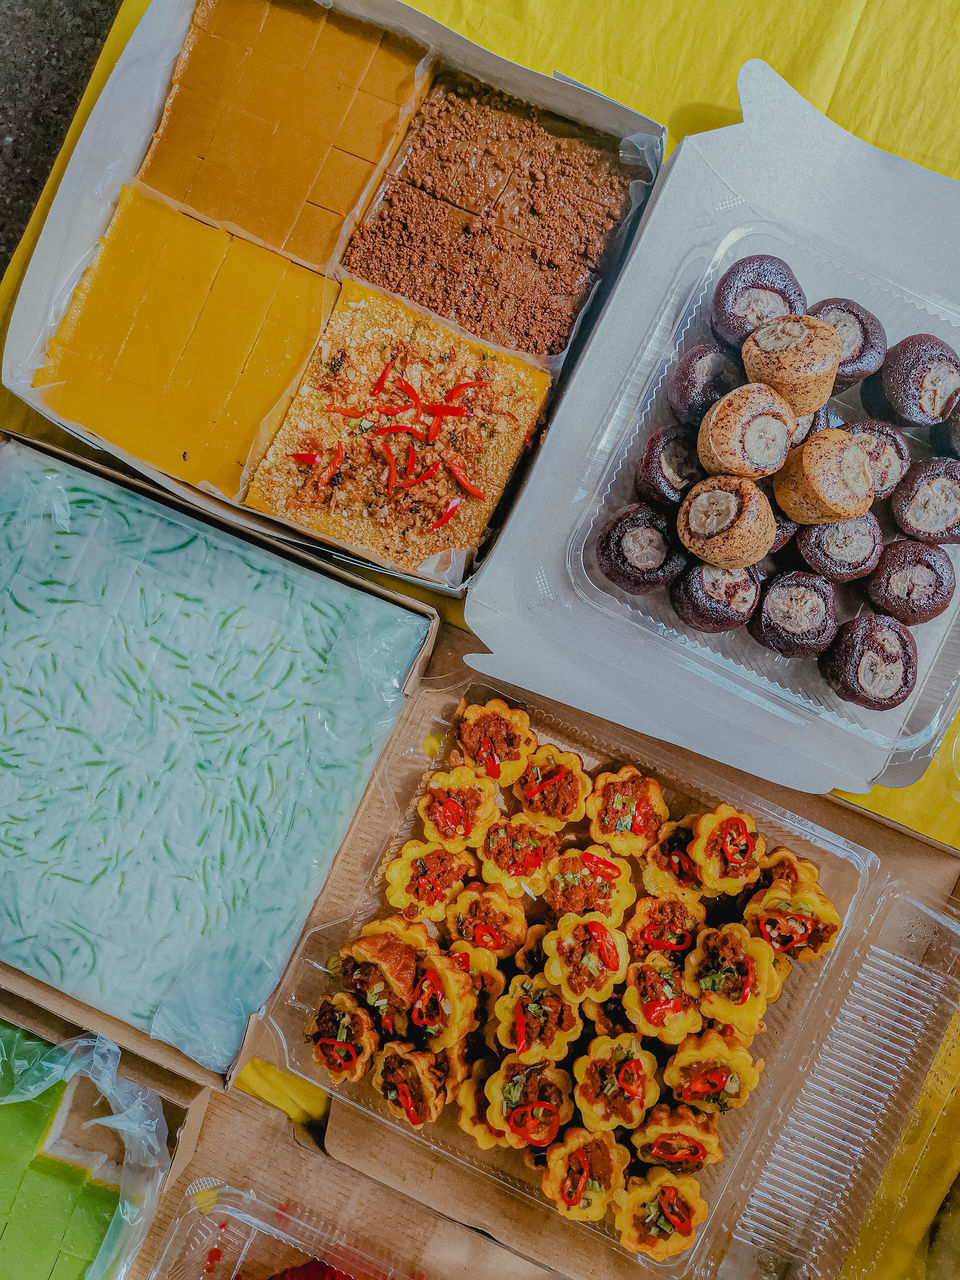 HIGH ANGLE VIEW OF VARIOUS FOOD FOR SALE AT MARKET STALL